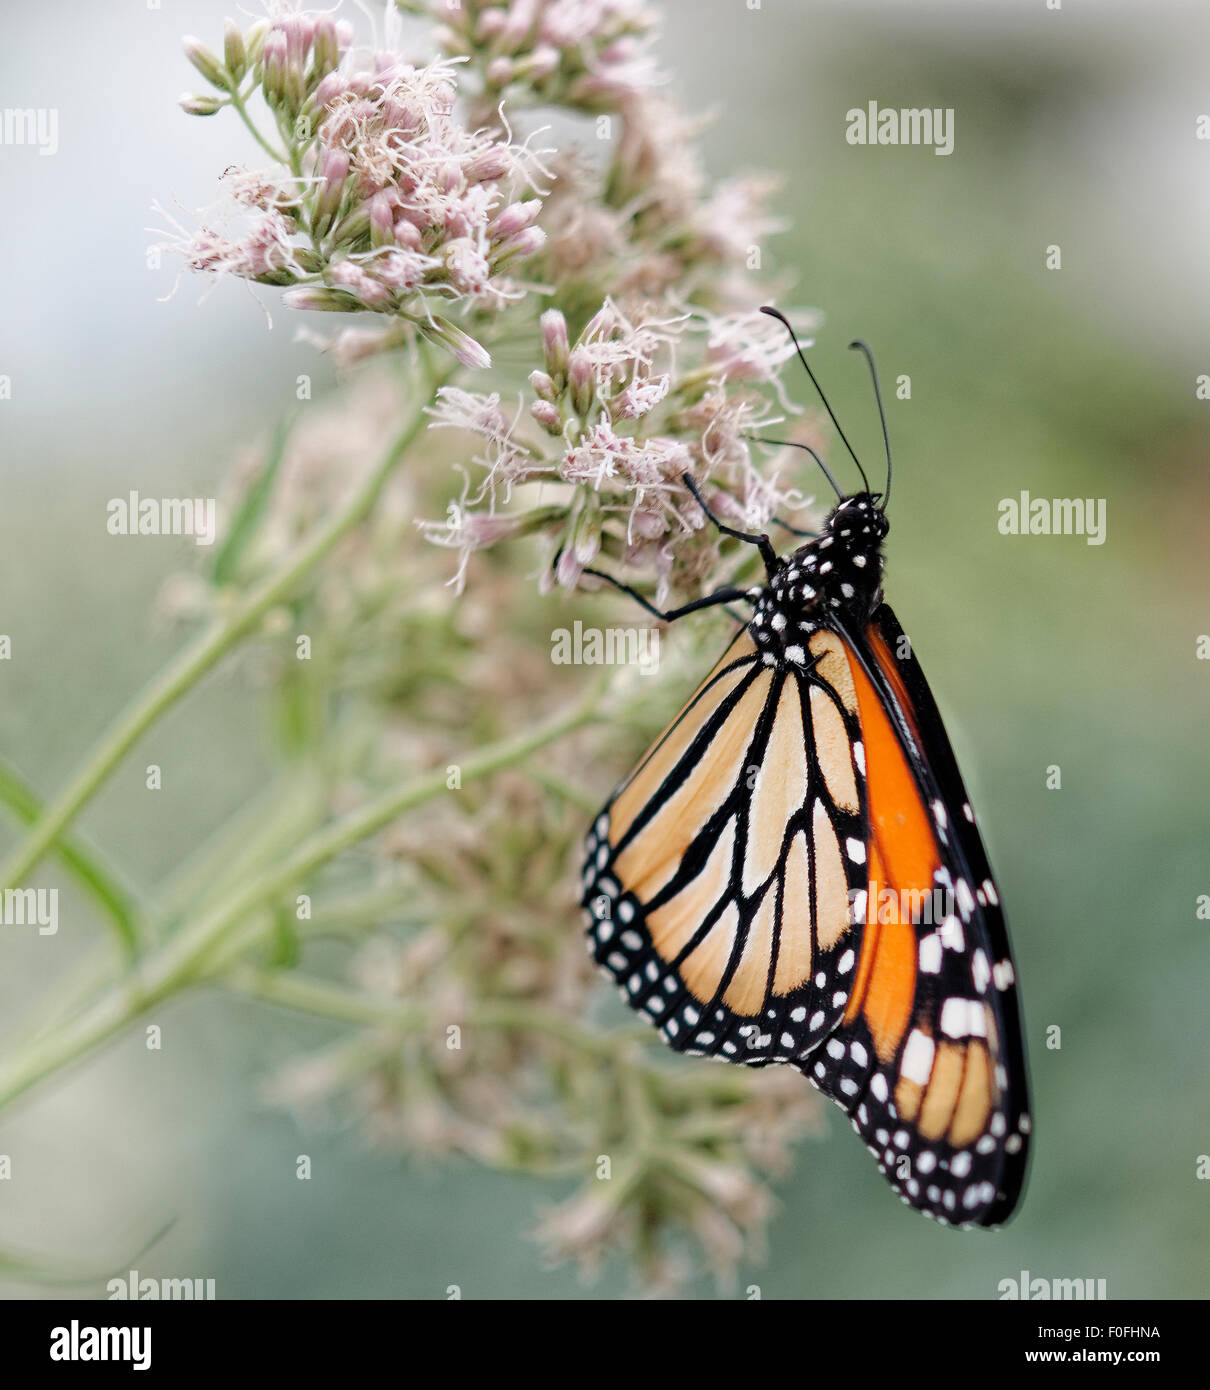 The monarch butterfly (Danaus plexippus) is a milkweed butterfly (subfamily Danainae) in the family Nymphalidae. Stock Photo